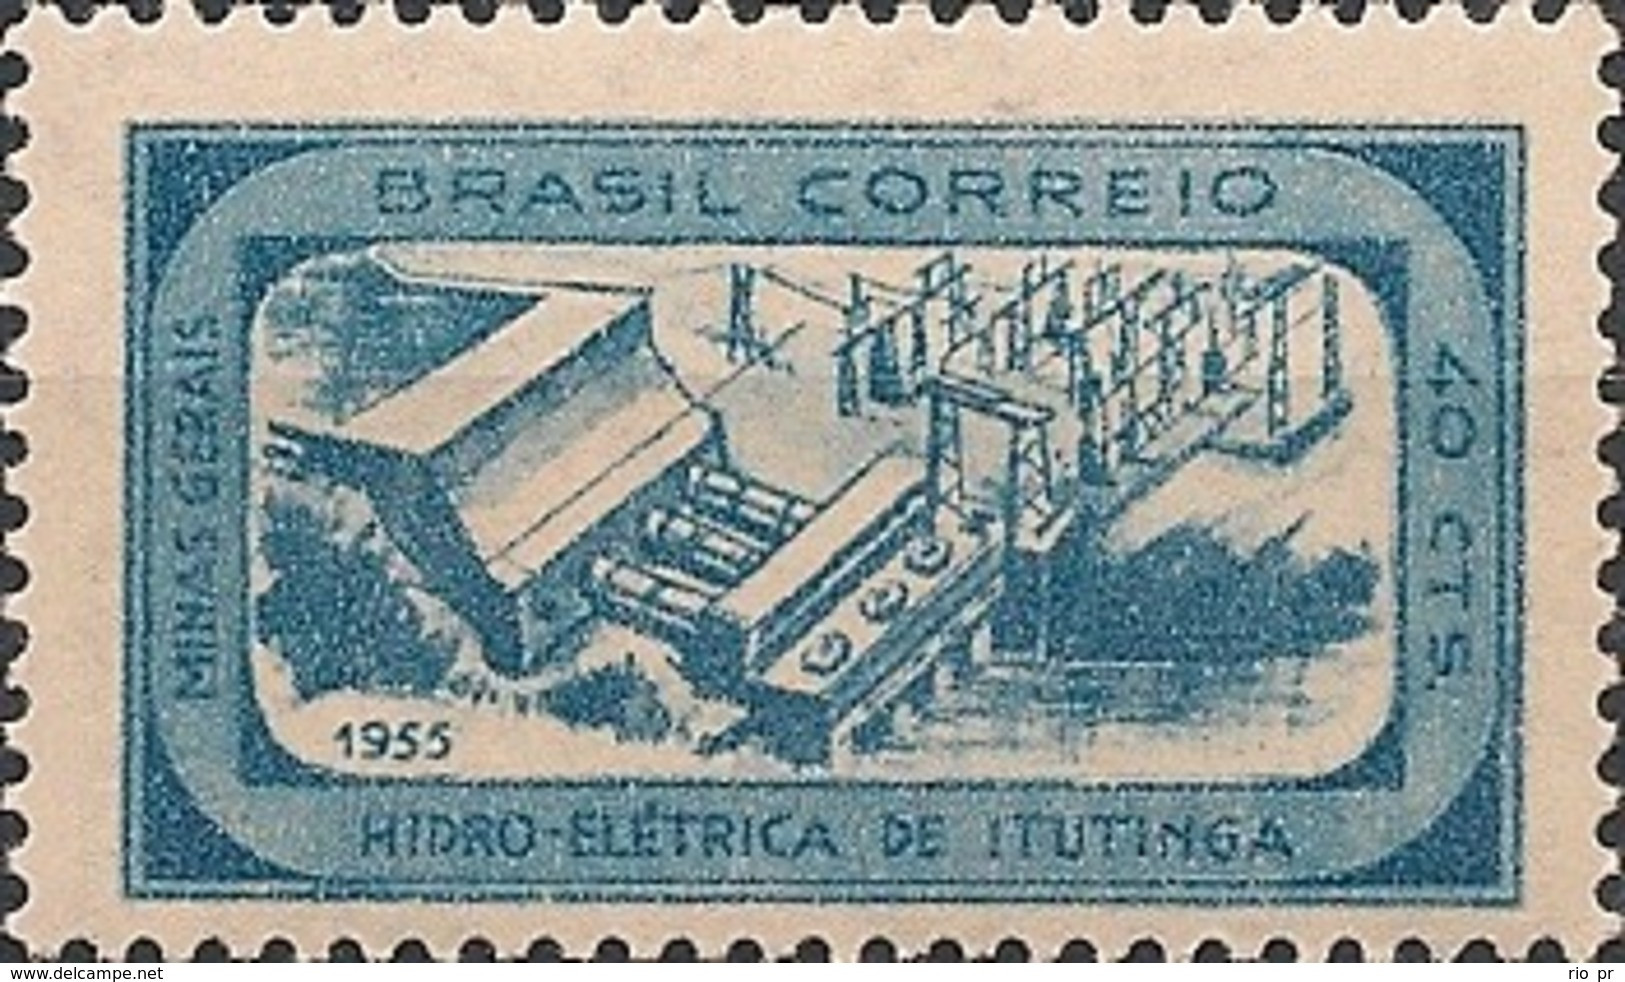 BRAZIL - INAUGURATION OF THE ITUTINGA HYDROELECTRIC PLANT AT LAVRAS 1955 - MNH - Eau